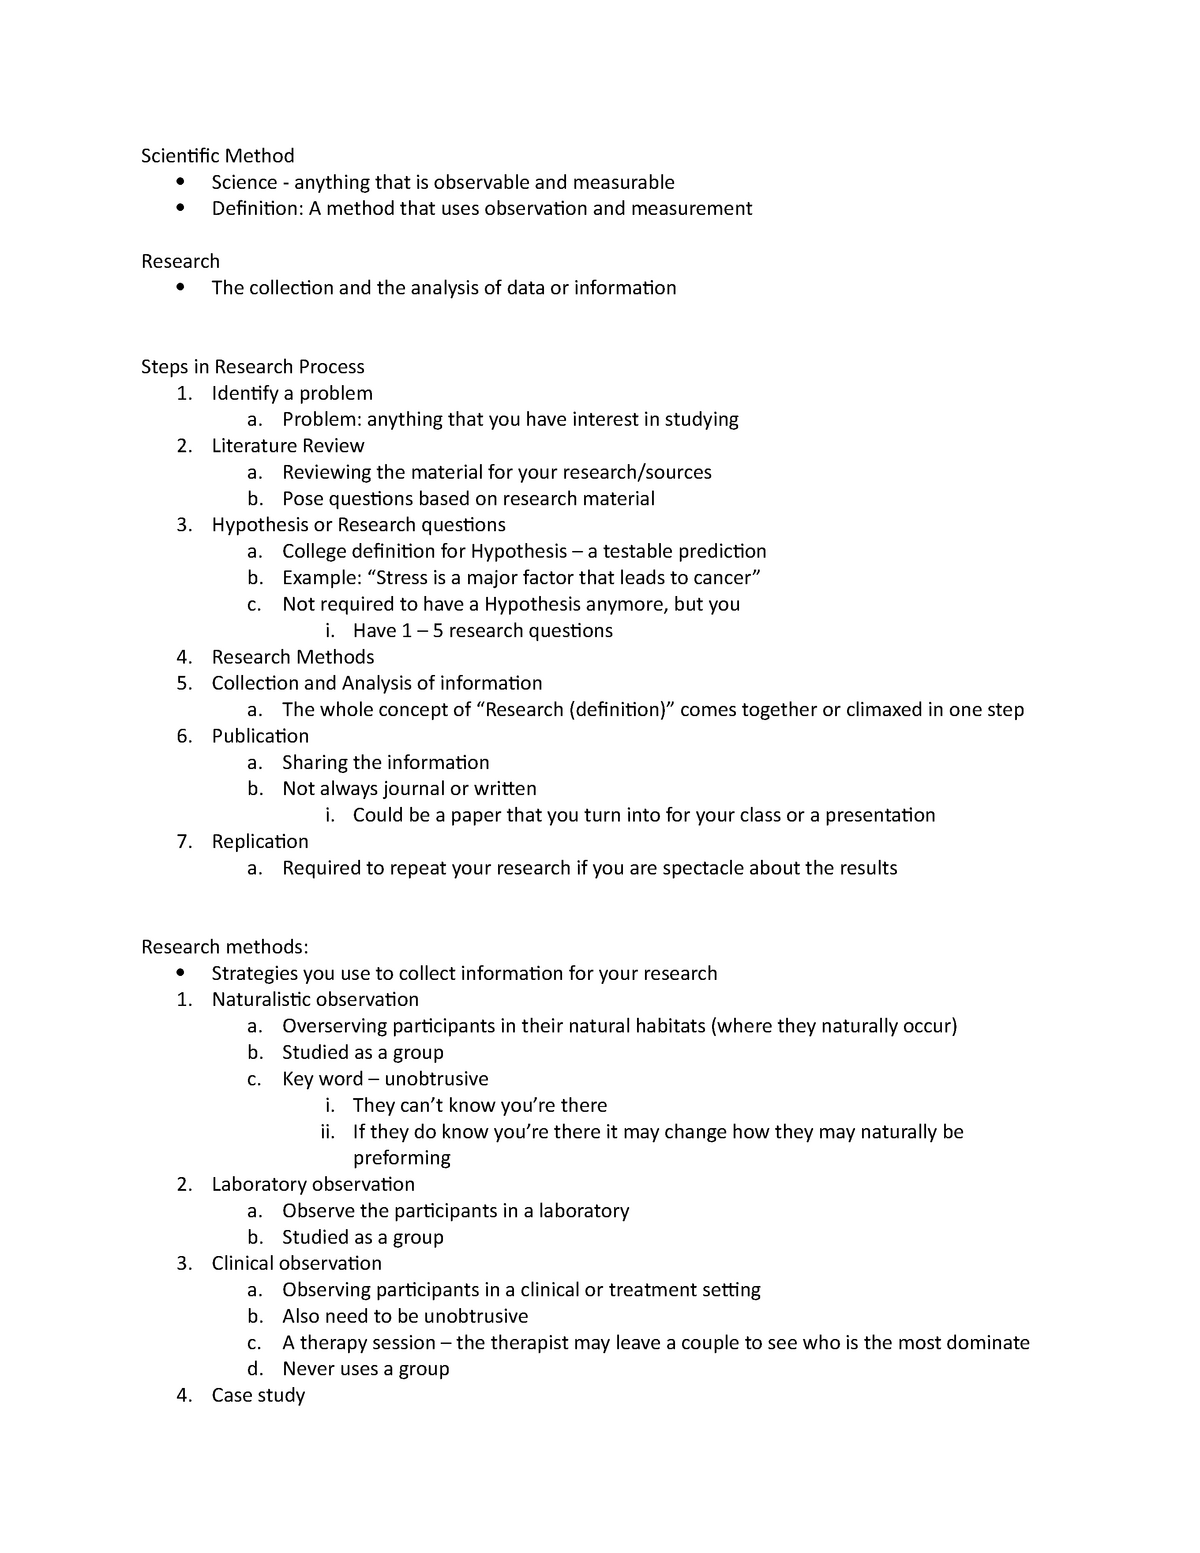 Chapter 2 Notes - Marcia Hunter - Scientific Method Science - anything ...